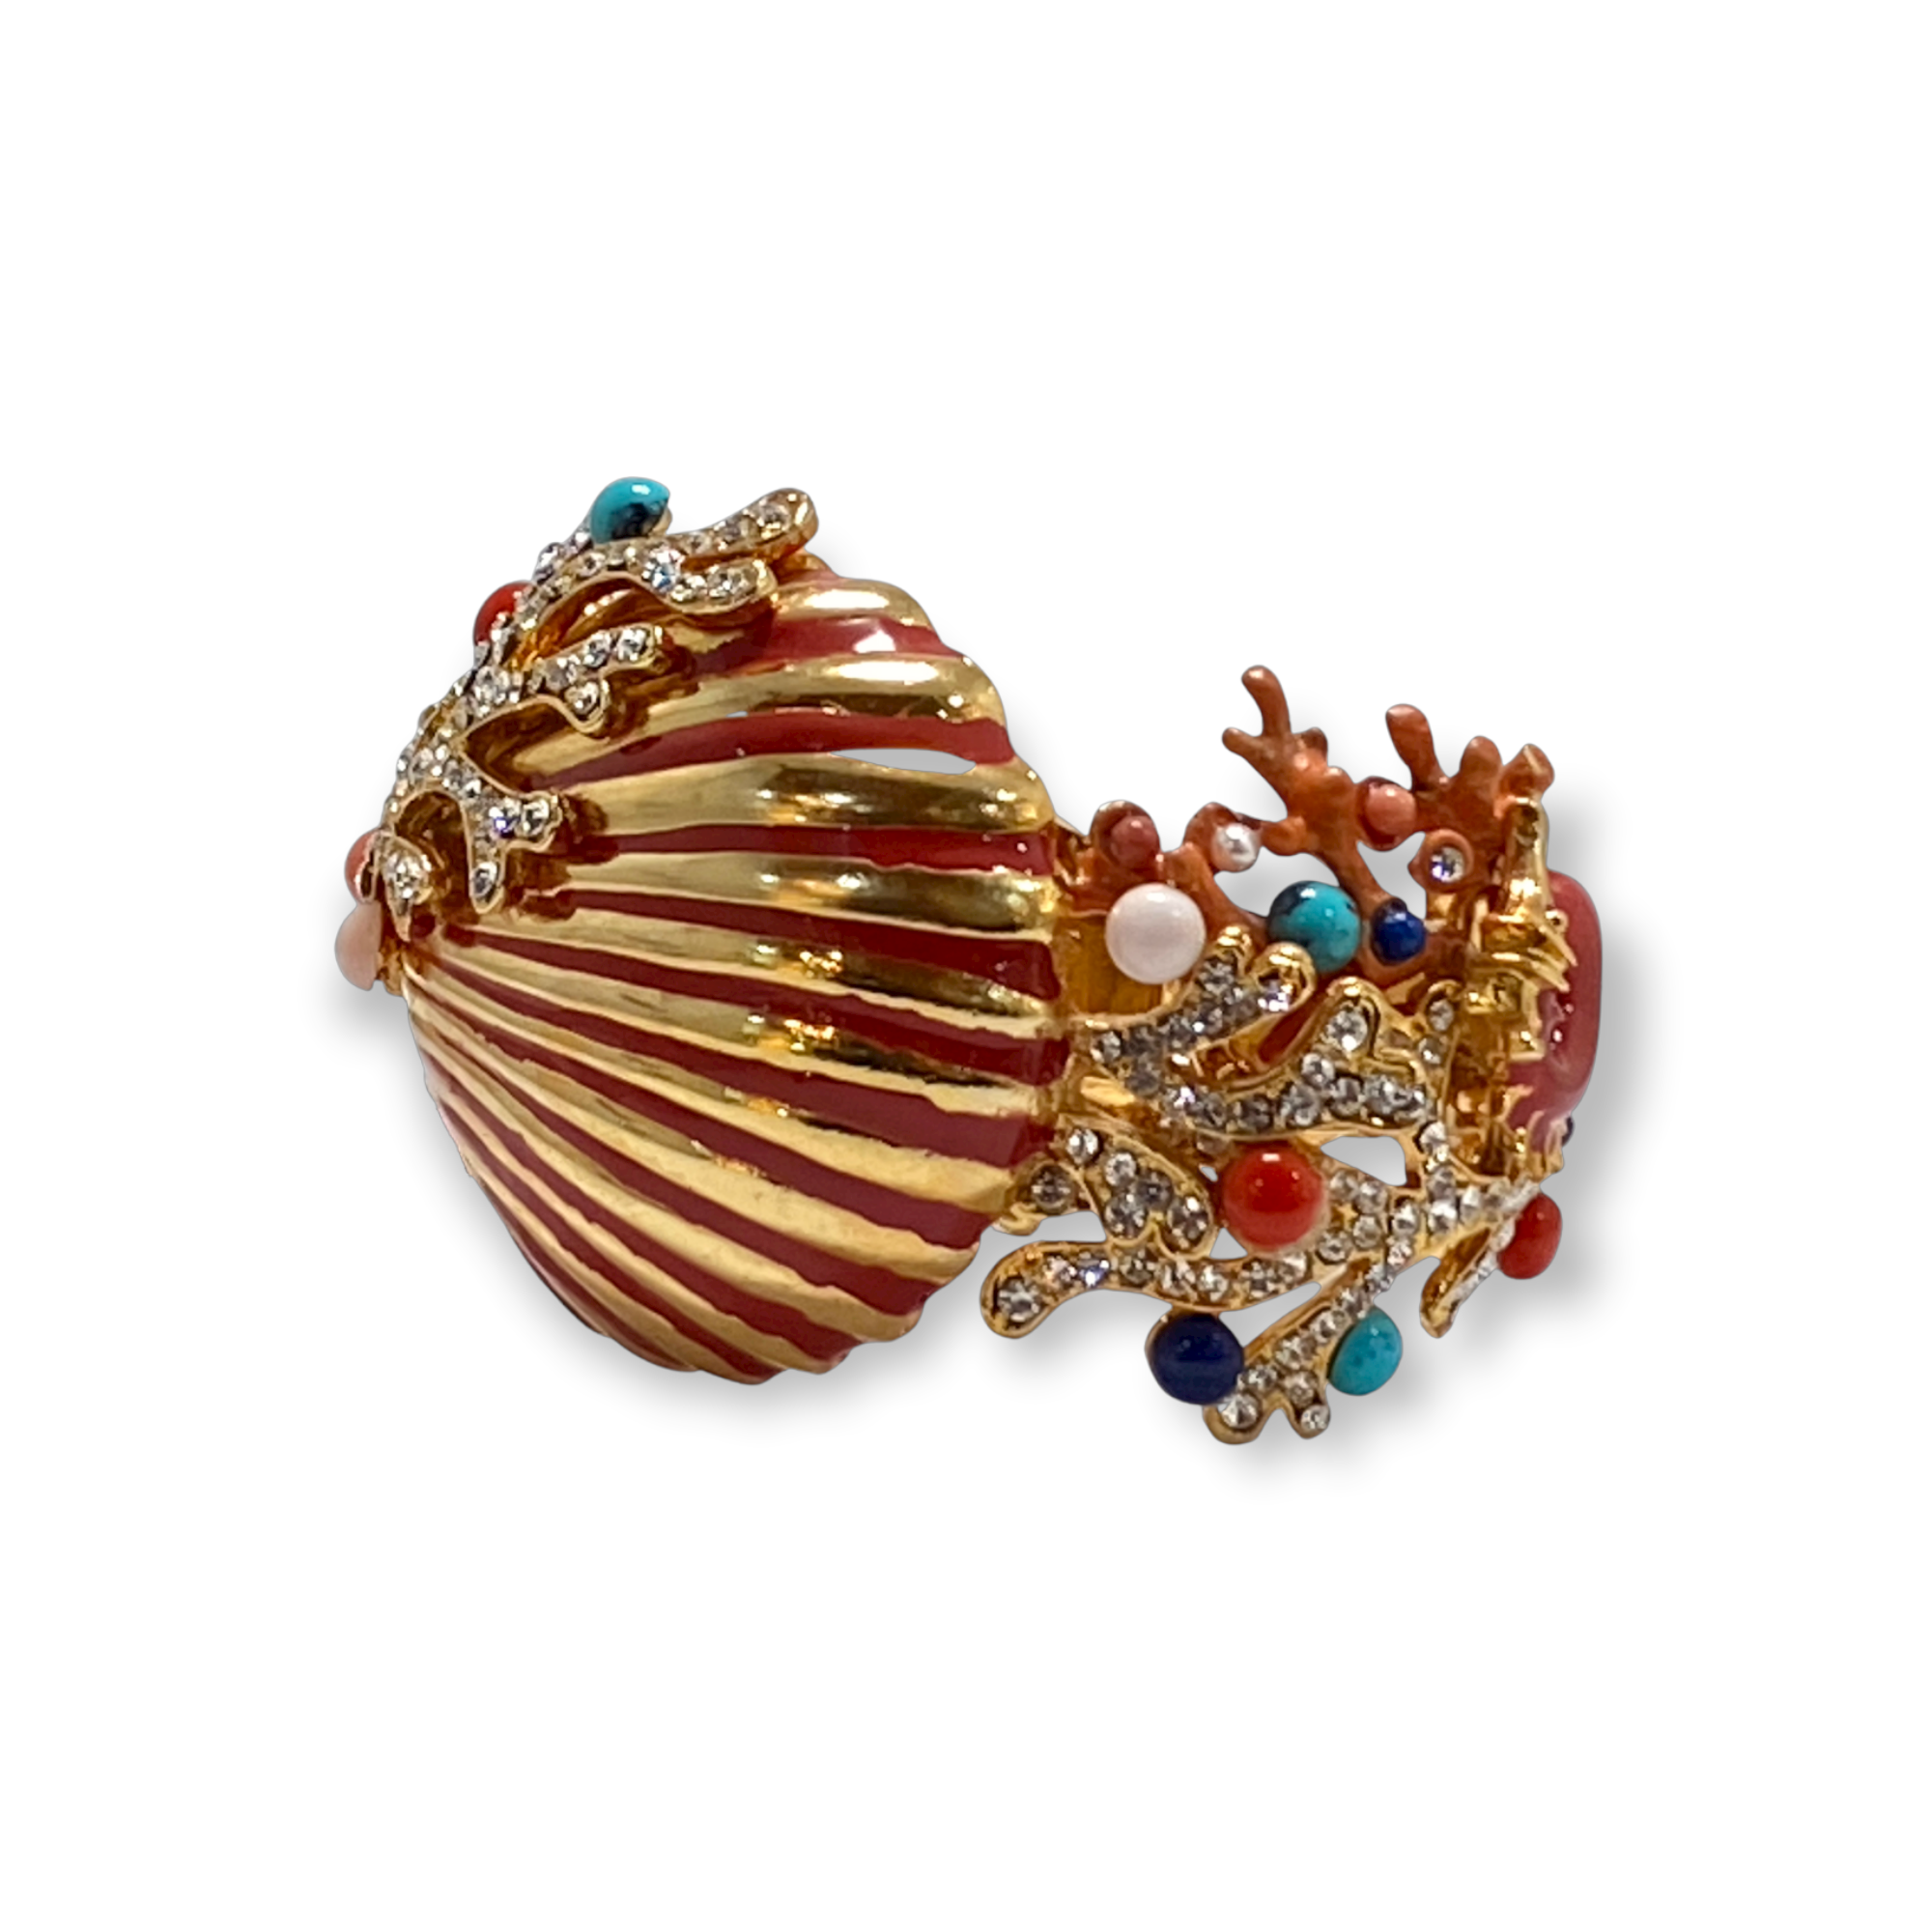 Made in Italy. Carlo Zini Magnificent bracelet with a coral reef theme Hypoallergenic rhodium plated in 18 KT gold and multicolor enamels elegant construction in swarovski crystals, pearls and multicolored resins 100% handmade